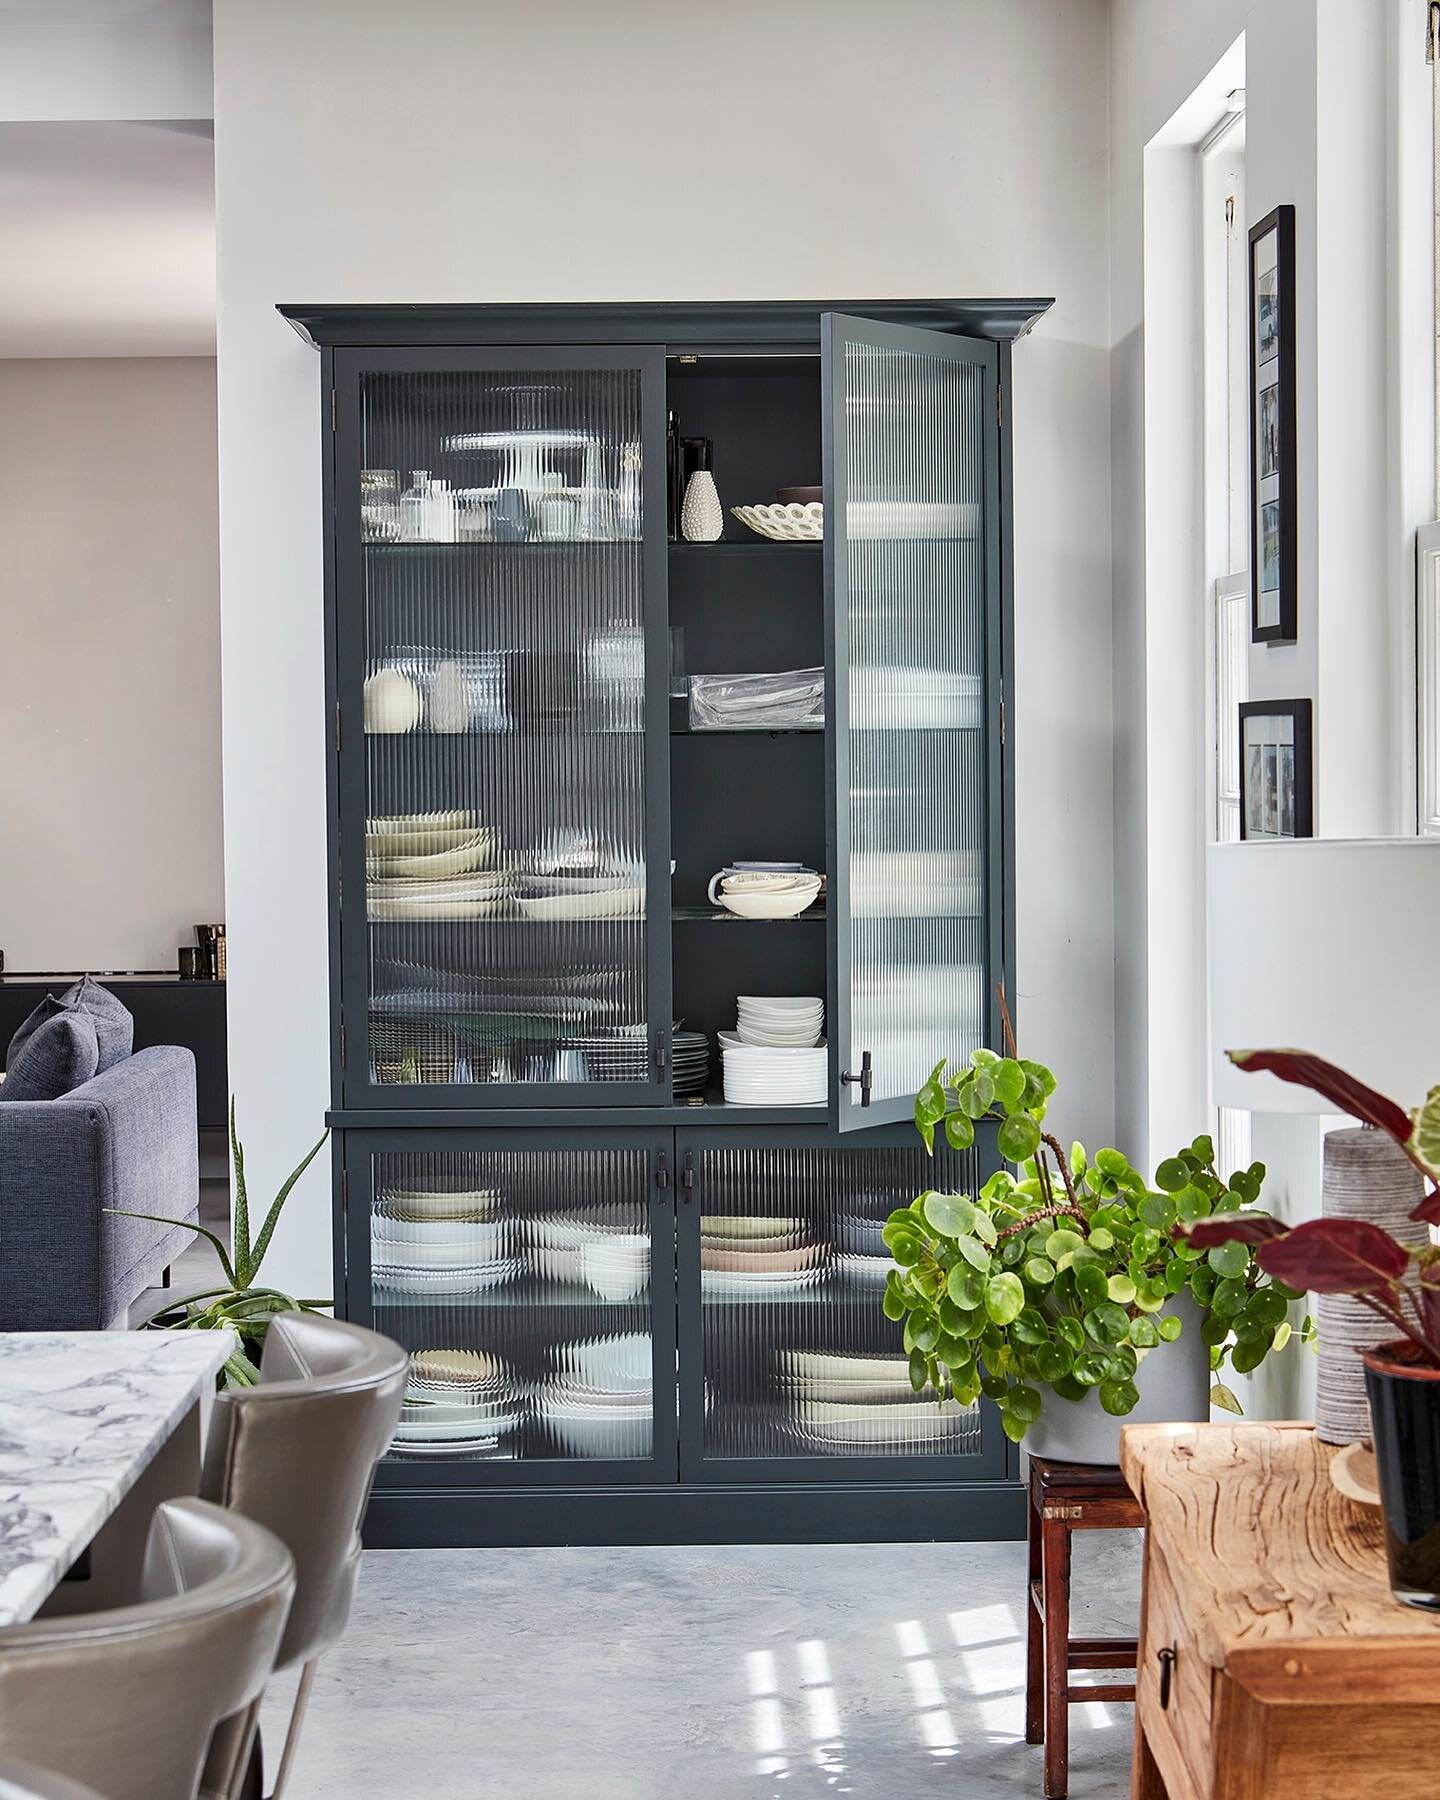 The crittall look isn't for everyone. For some people it can feel a bit too tough, a bit too industrial. ⁠
⁠
Here at our Heathview project we used timber to create a crittall style dresser, with a super slim frame, painted in an anthracite colour and